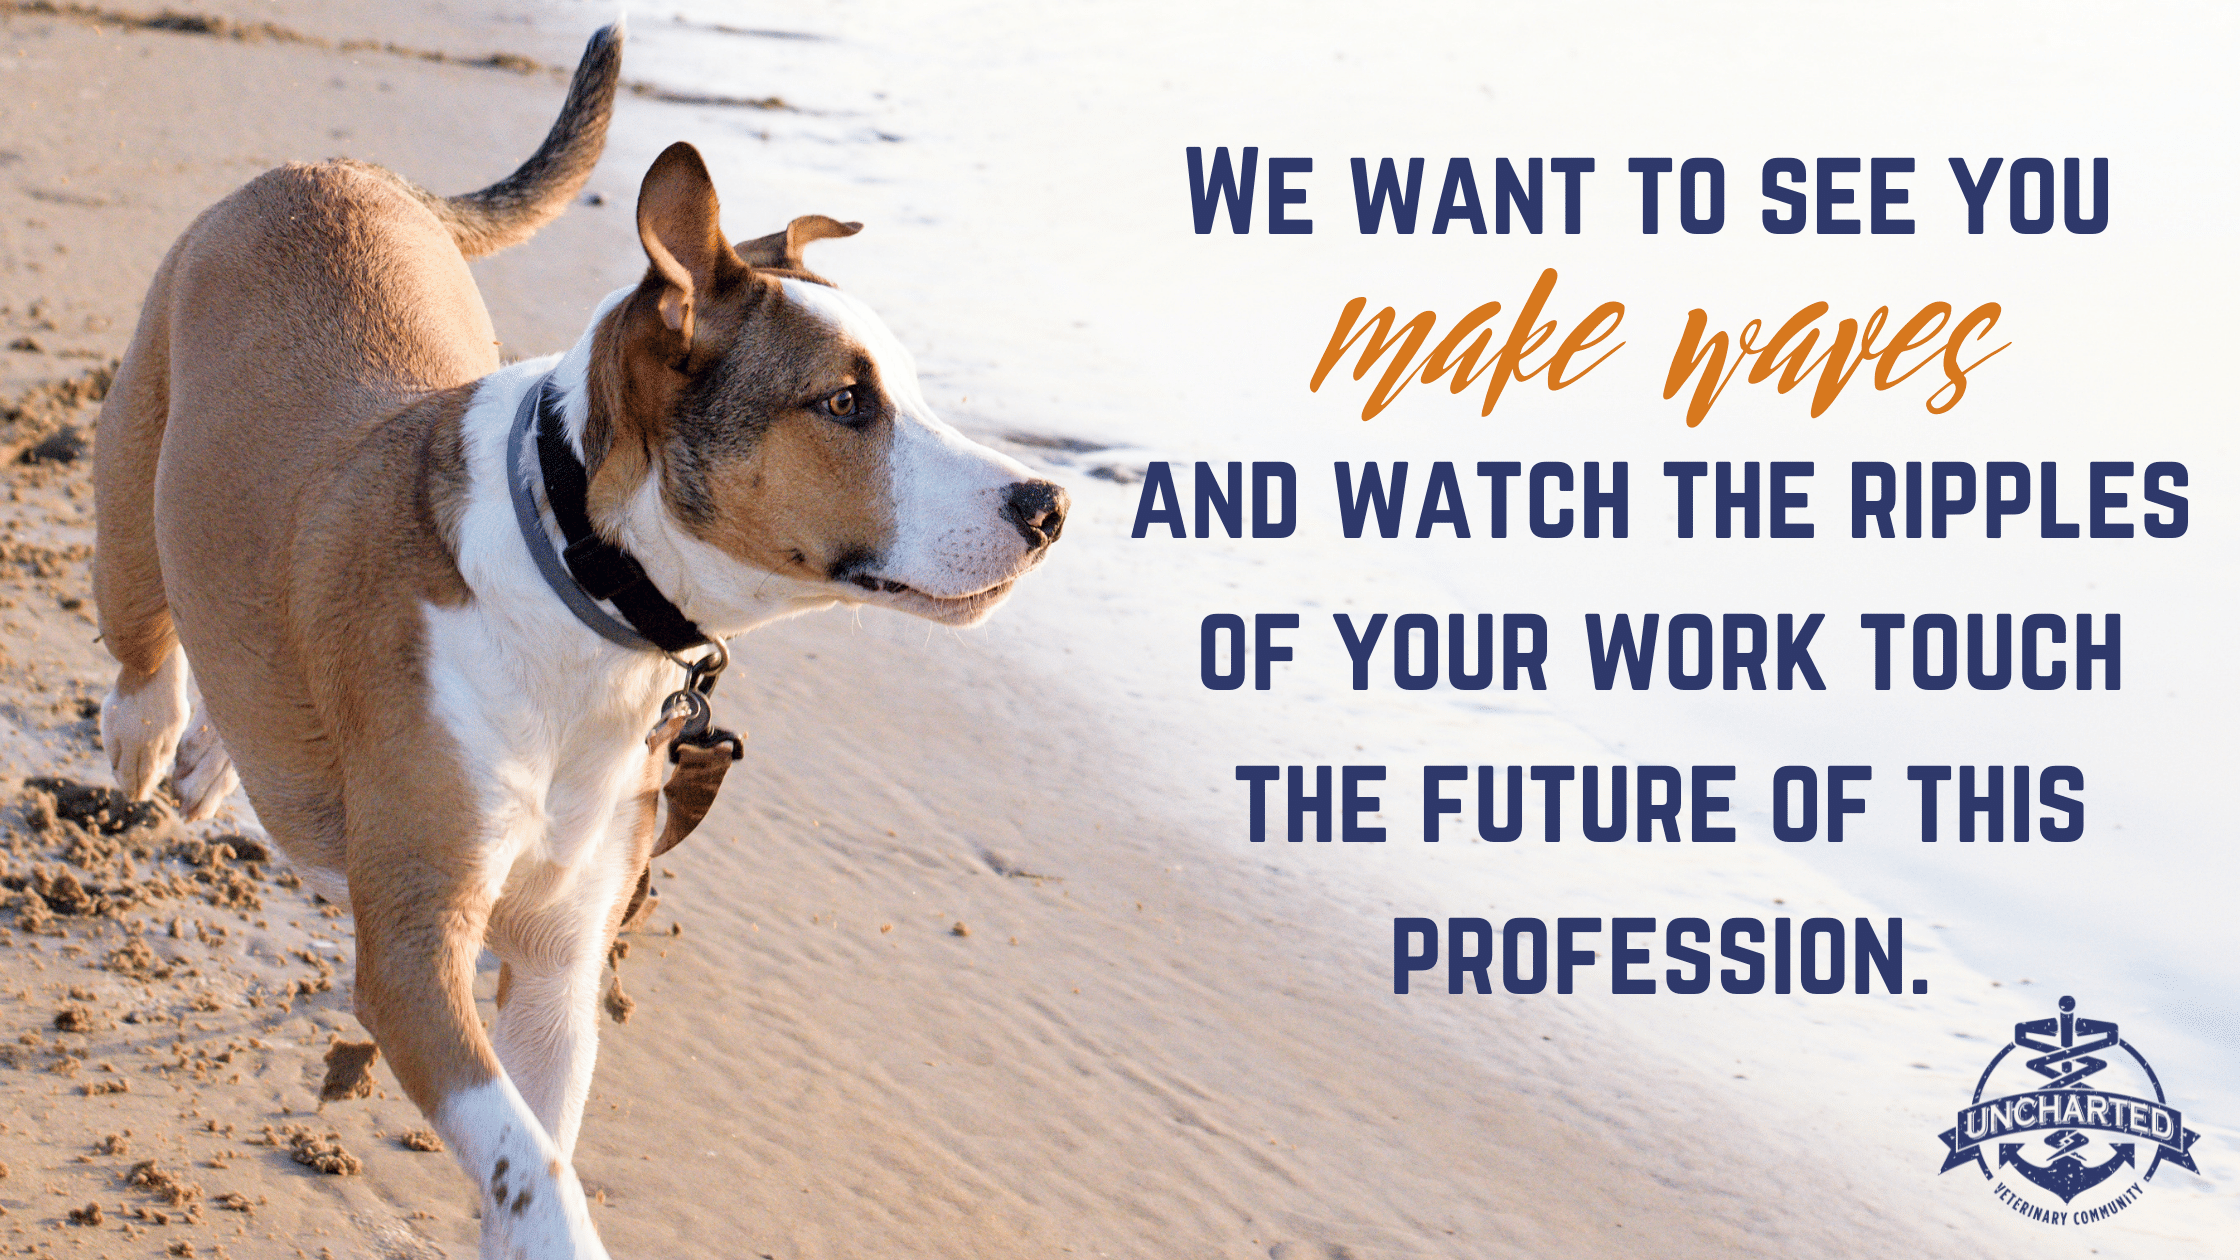 photo of dog running on a beach with text We want to see you make waves and watch the ripples of your work touch the future of this profession